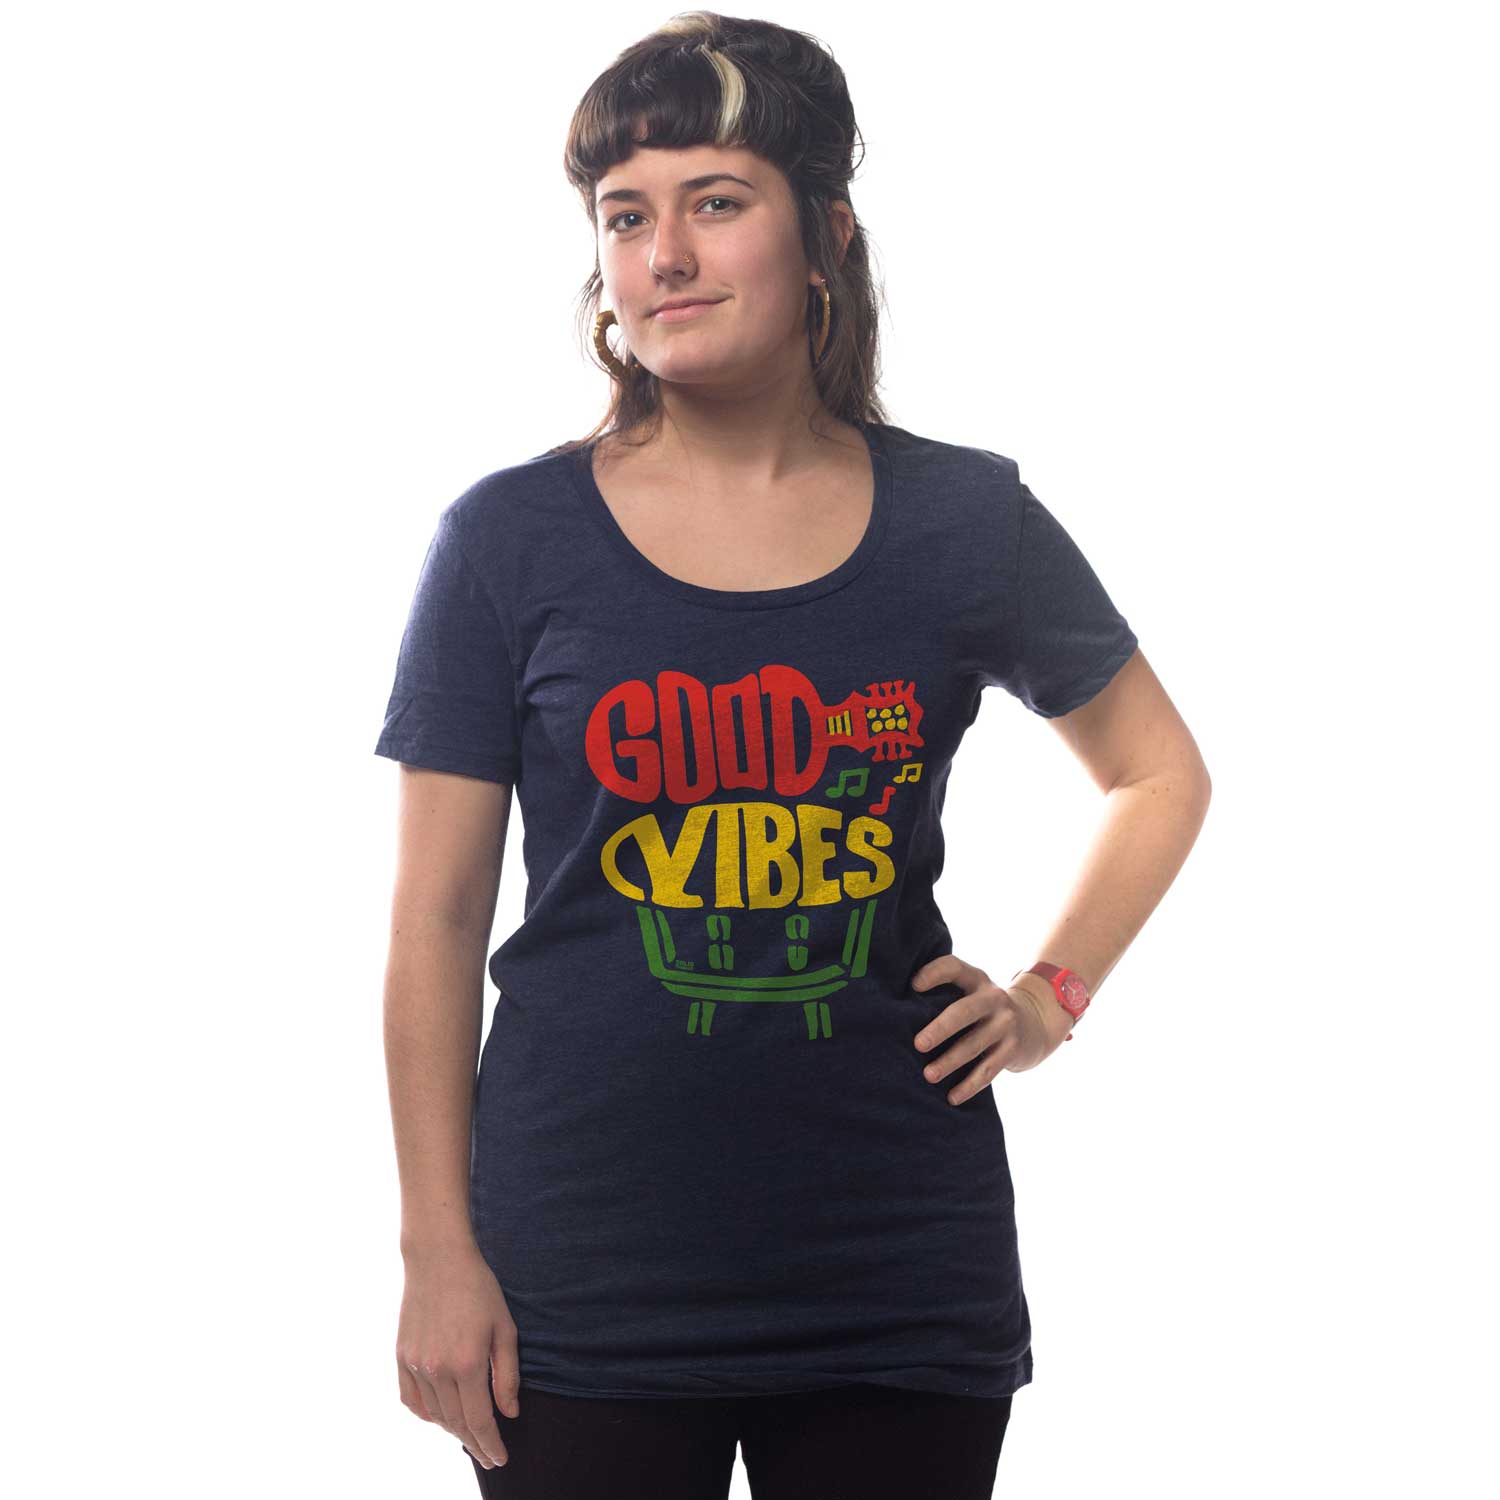 Women's Good Vibes Vintage Graphic Tee | Retro Music T-shirt | Solid Threads